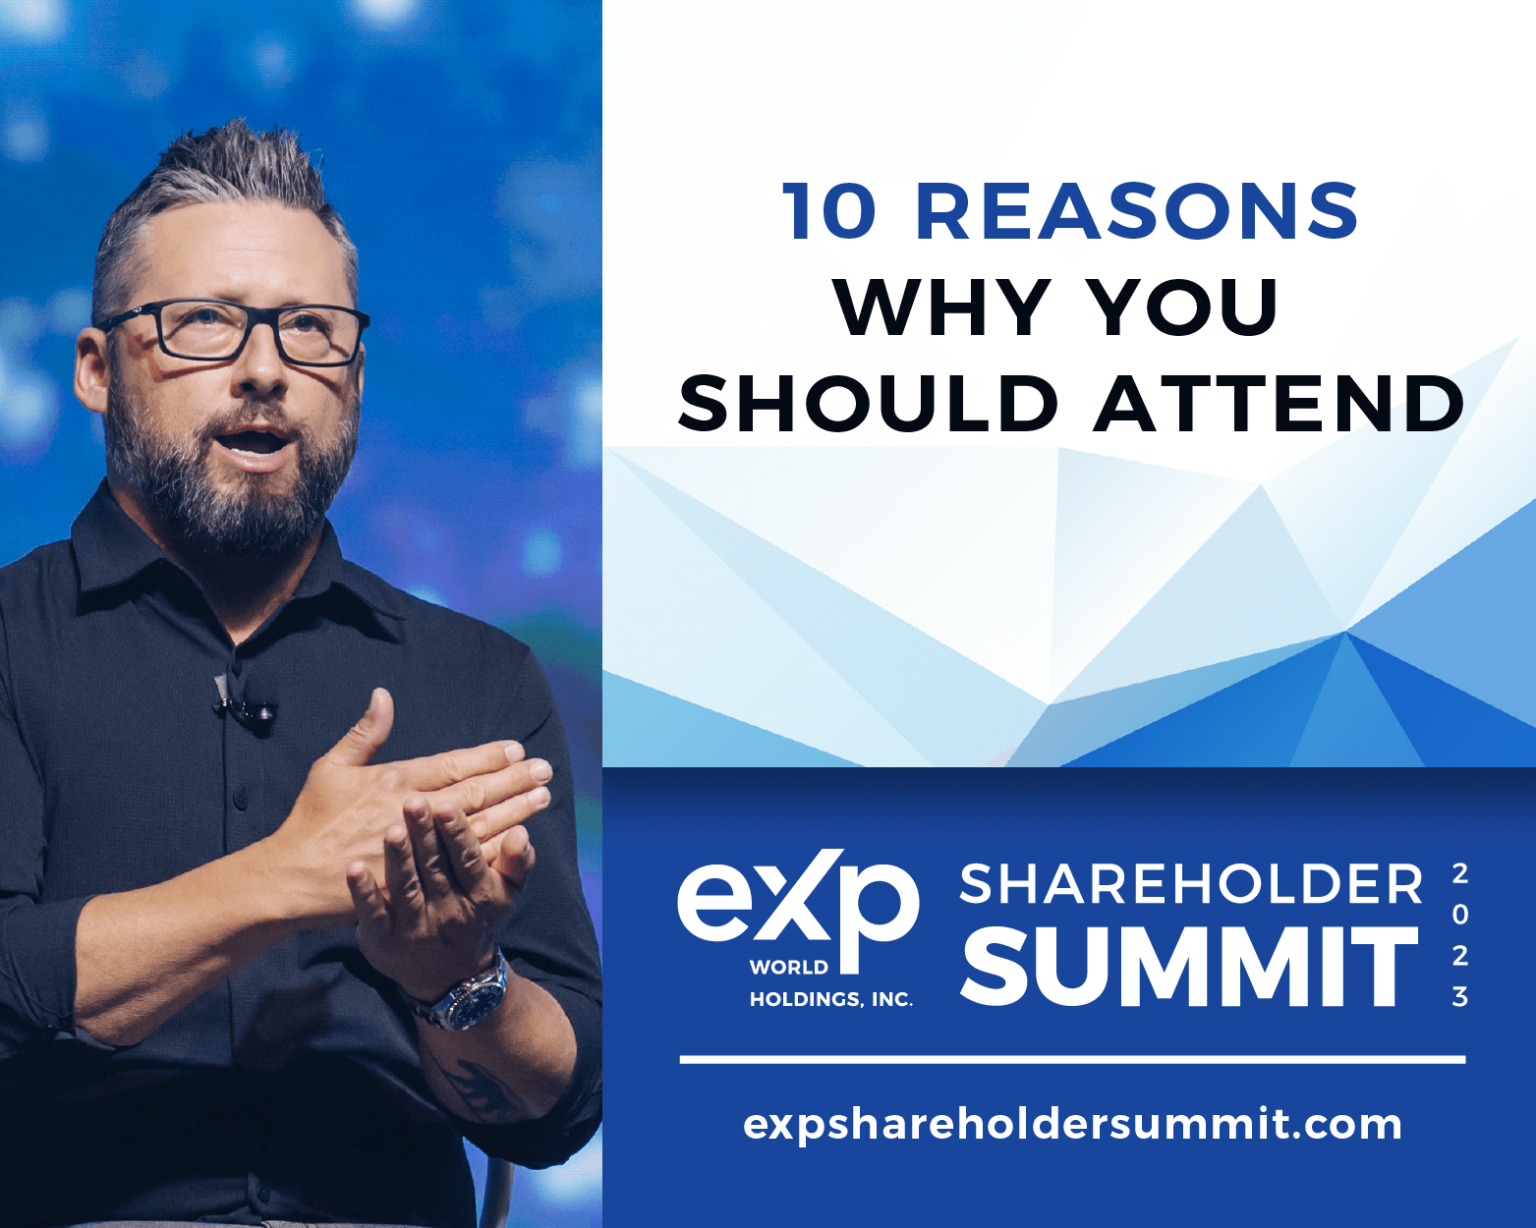 10 Reasons to Attend the eXp Shareholder Summit eXp Life